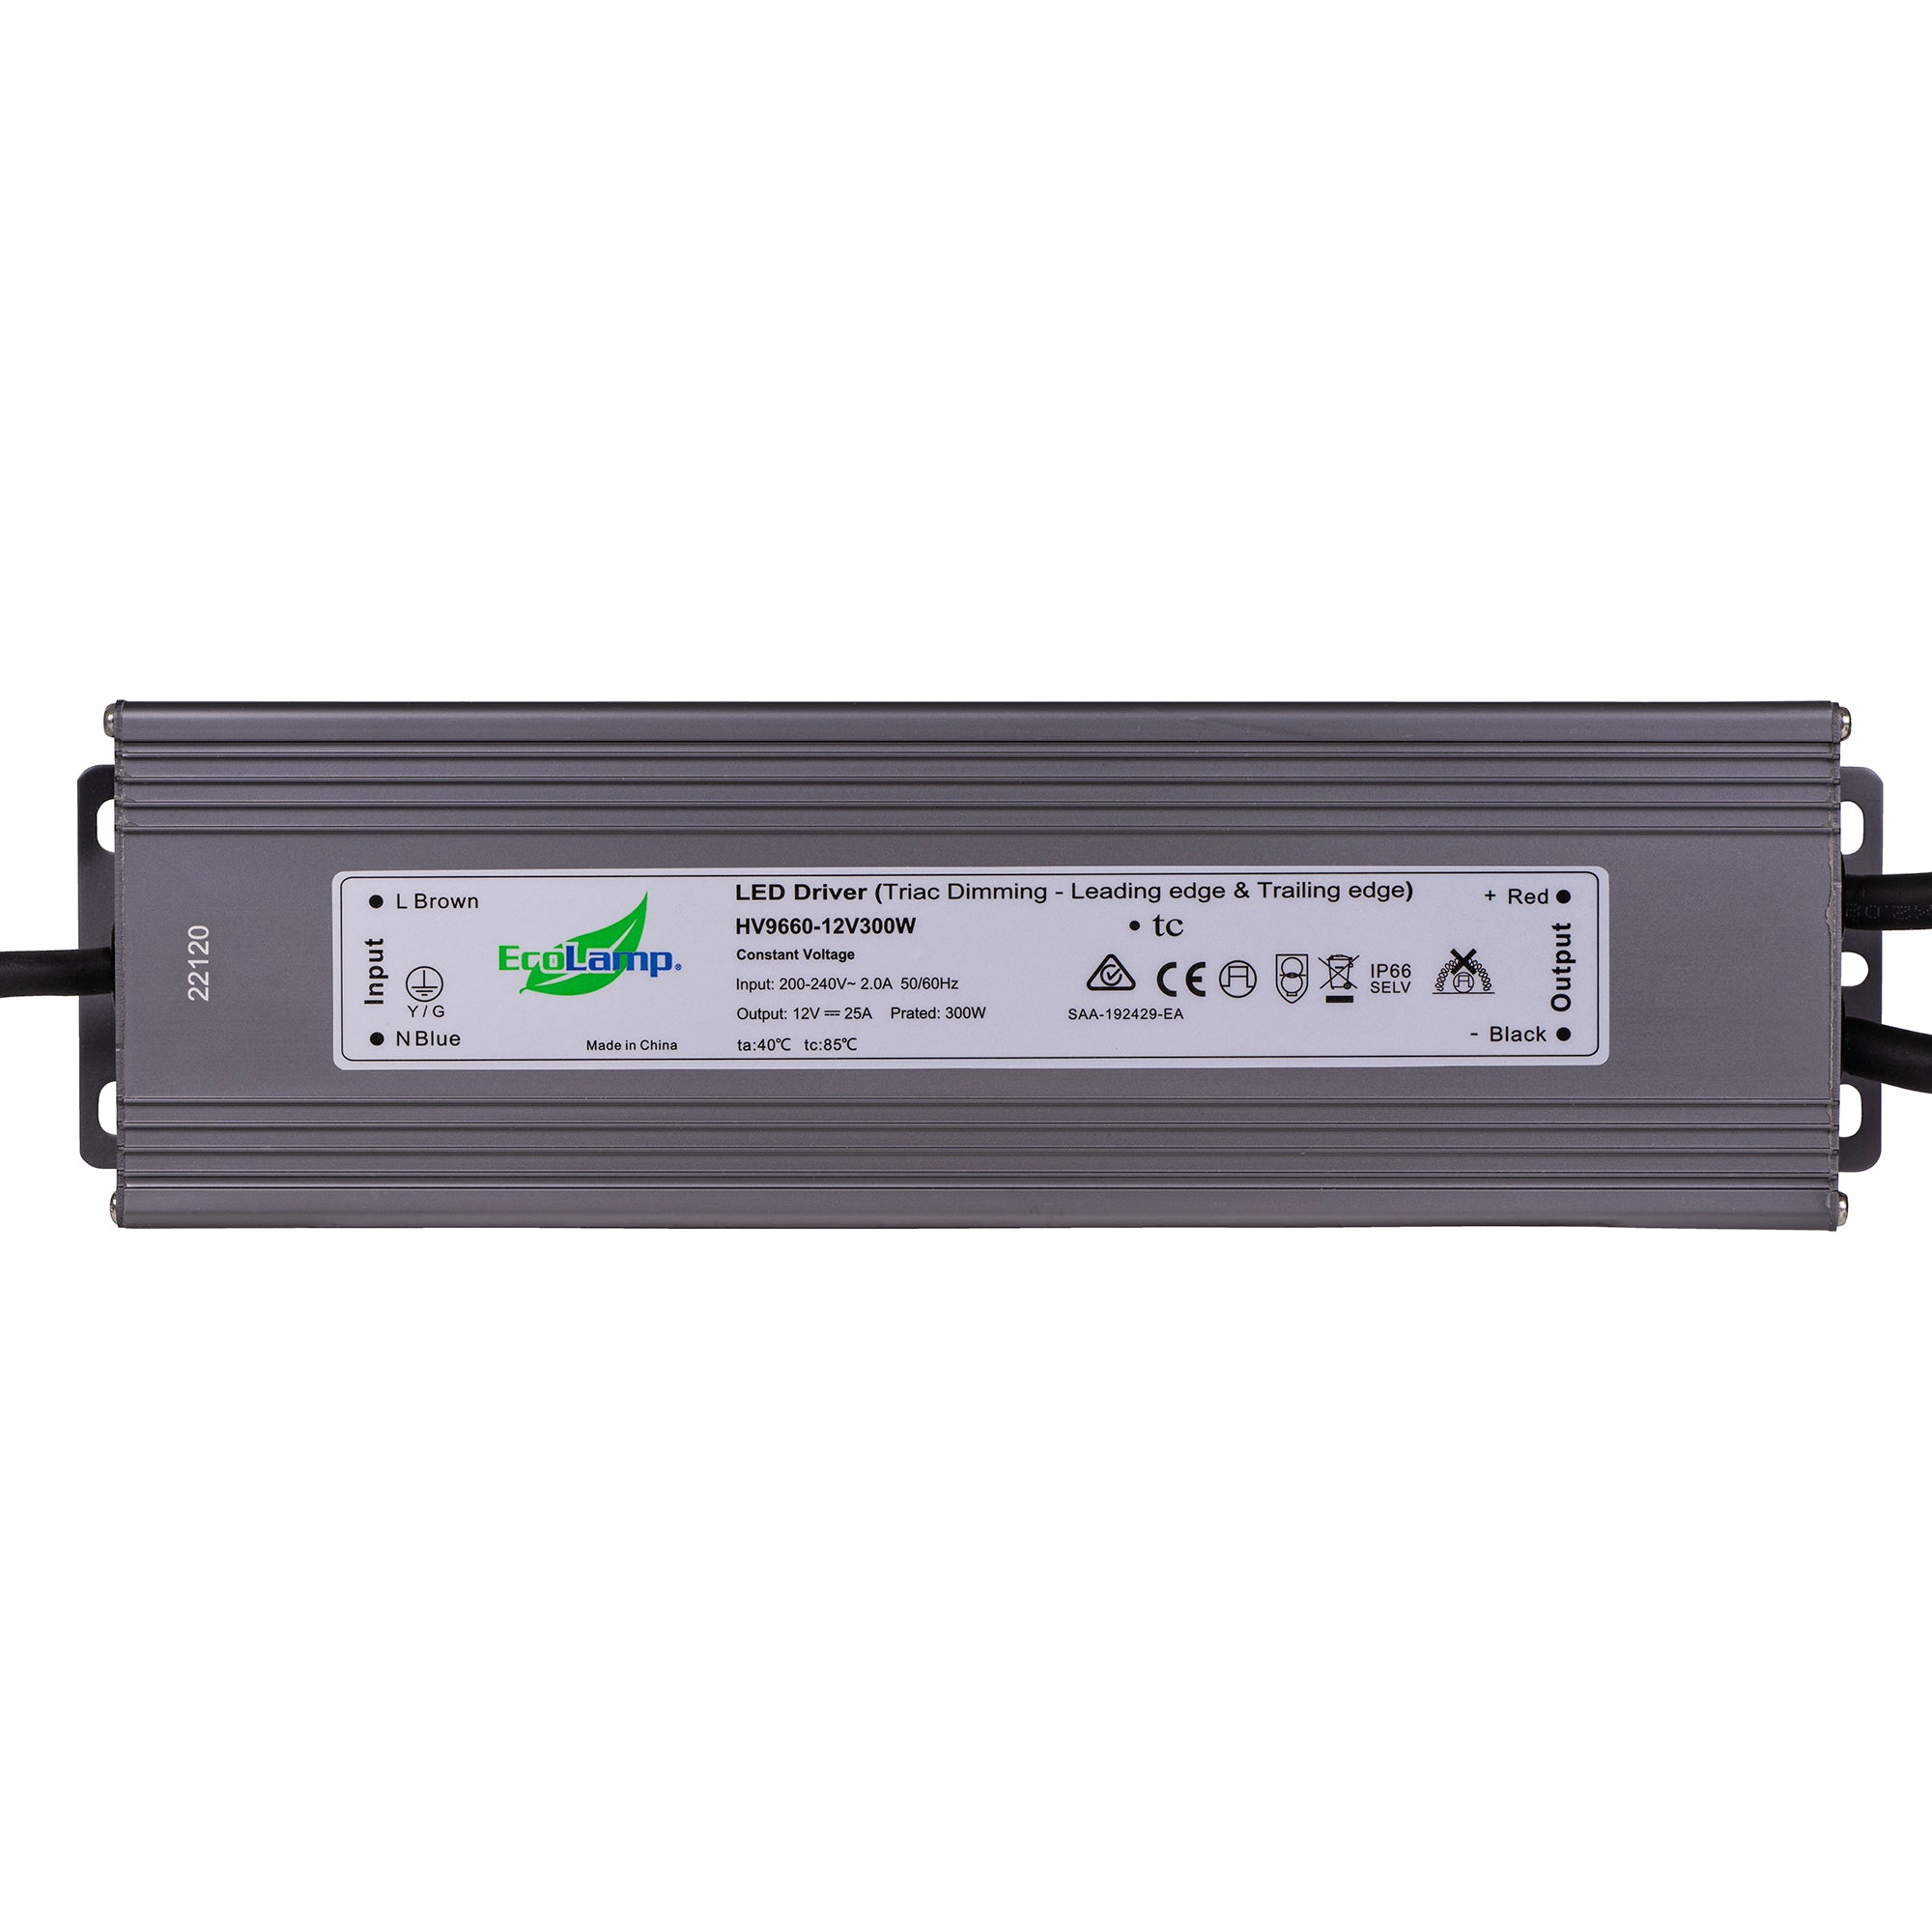 HV9660-300W - 300W Weatherproof Dimmable LED Driver